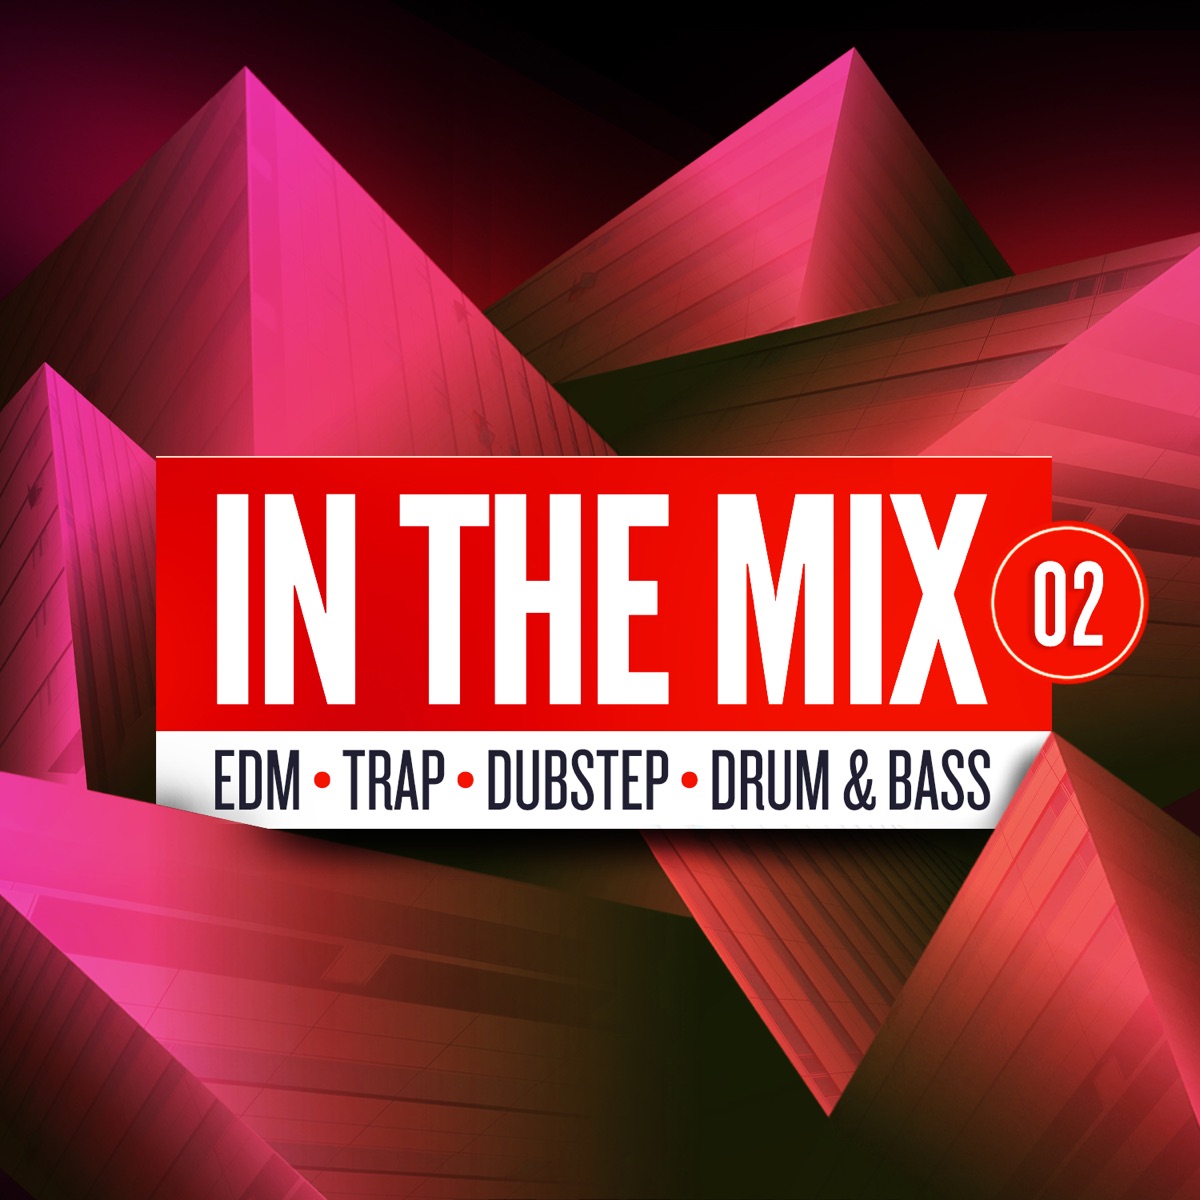 In the Mix 02: Edm, Trap, Dubstep, Drum & Bass - Album by Various Artists -  Apple Music